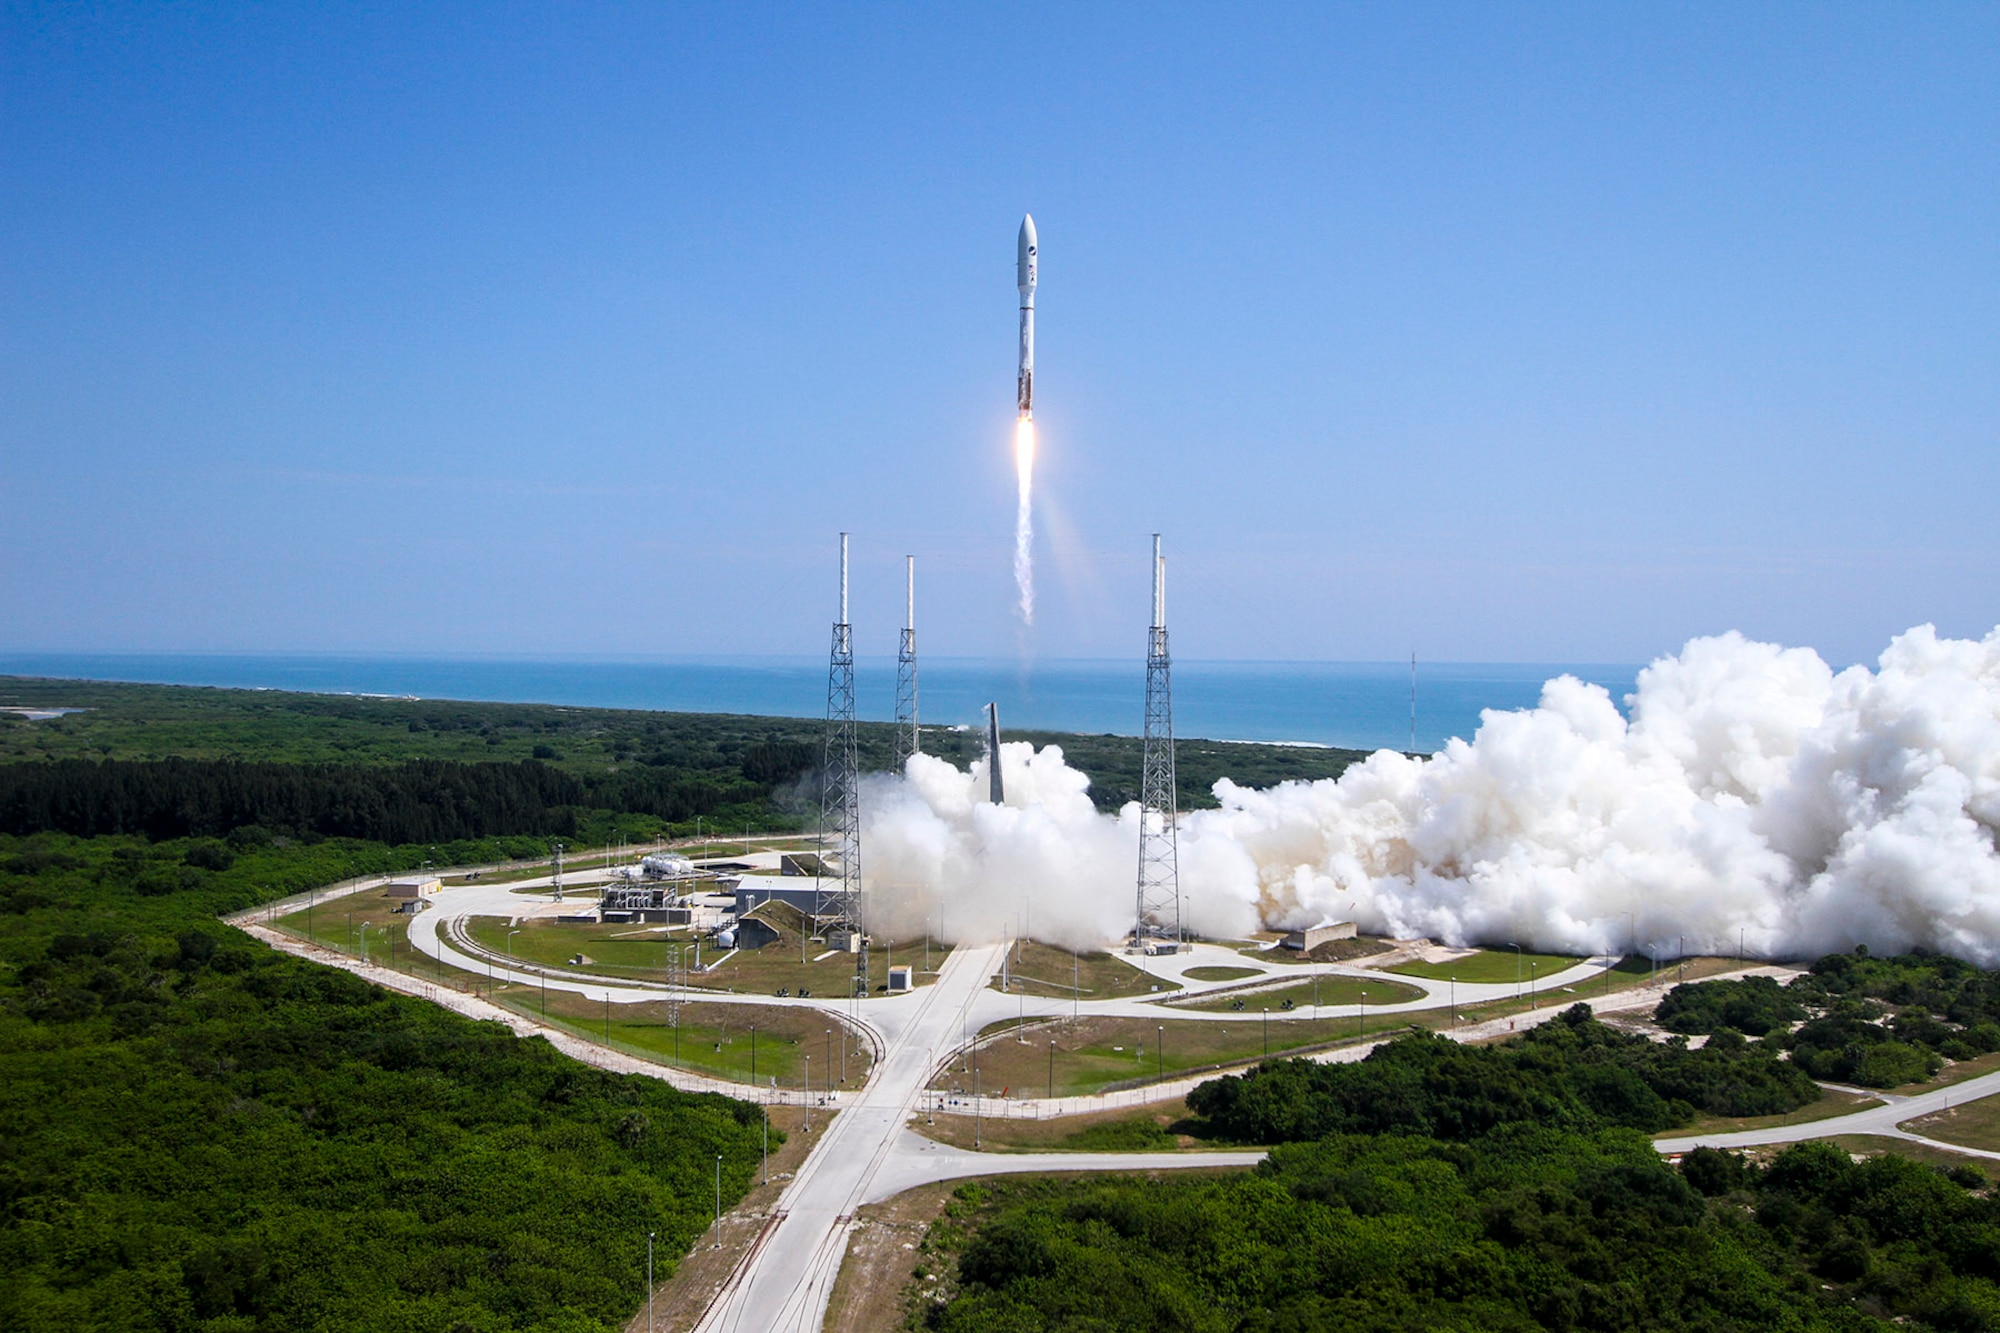 The 45th Space Wing successfully launched a United Launch Alliance-built Atlas V Evolved Expendable Launch Vehicle at 11:05 a.m. EDT, May 20, 2015, from Space Launch Complex 41 at Cape Canaveral Air Force Station, Fla. The Atlas V rocket carried into Low Earth Orbit an X-37B Orbital Test Vehicle (OTV), marking the fourth space flight for the X-37B program. (Photo/United Launch Alliance) 